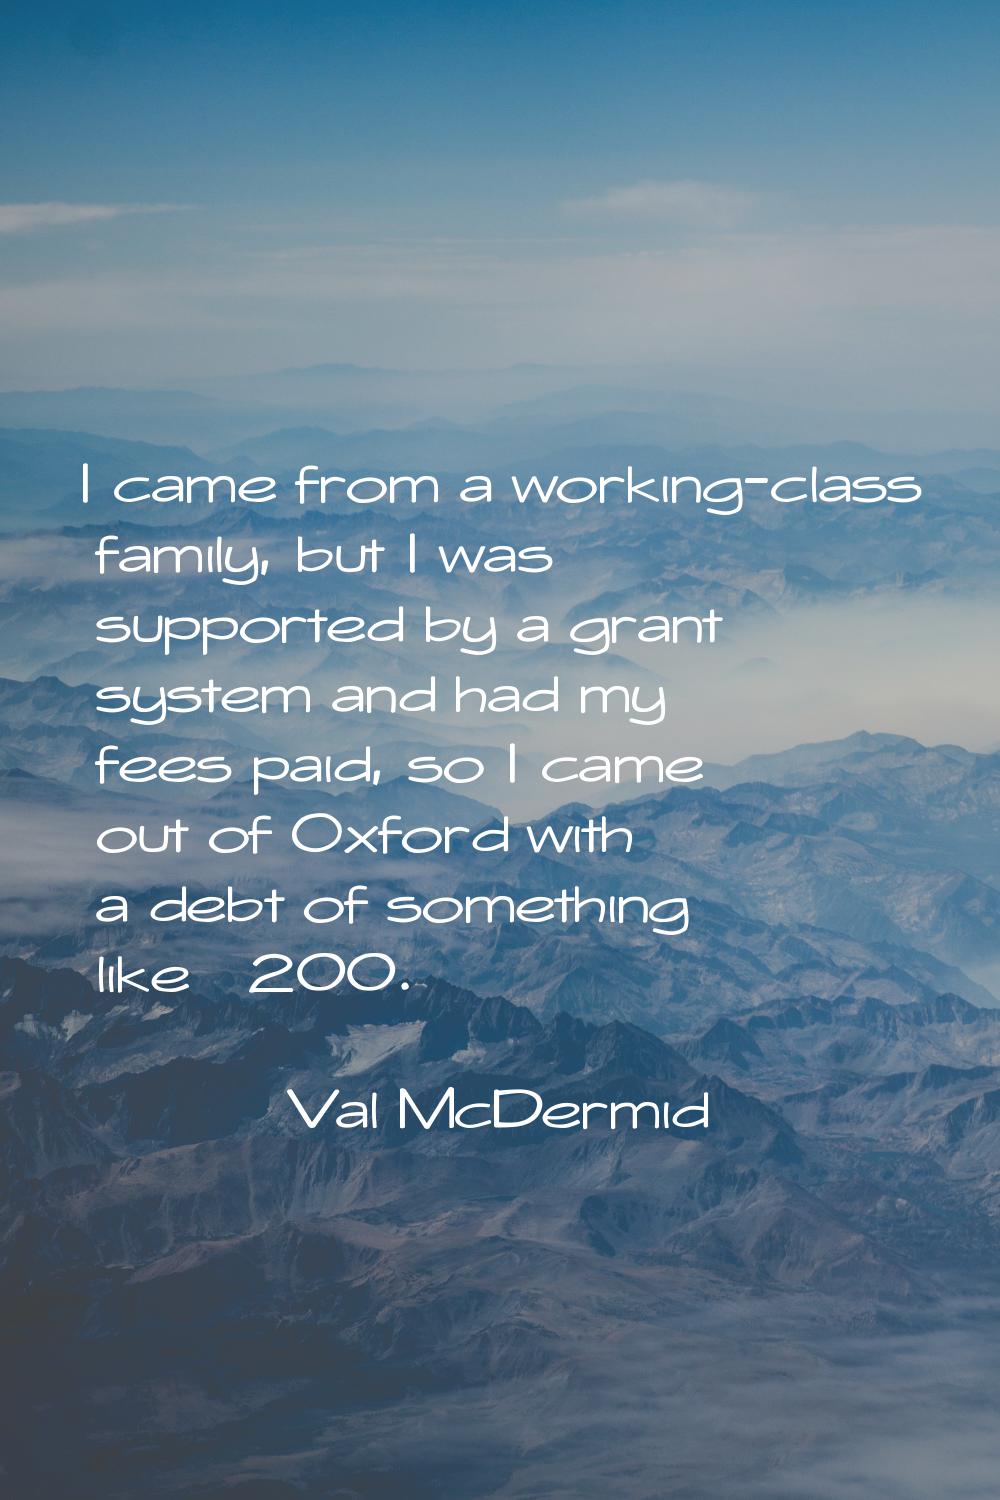 I came from a working-class family, but I was supported by a grant system and had my fees paid, so 